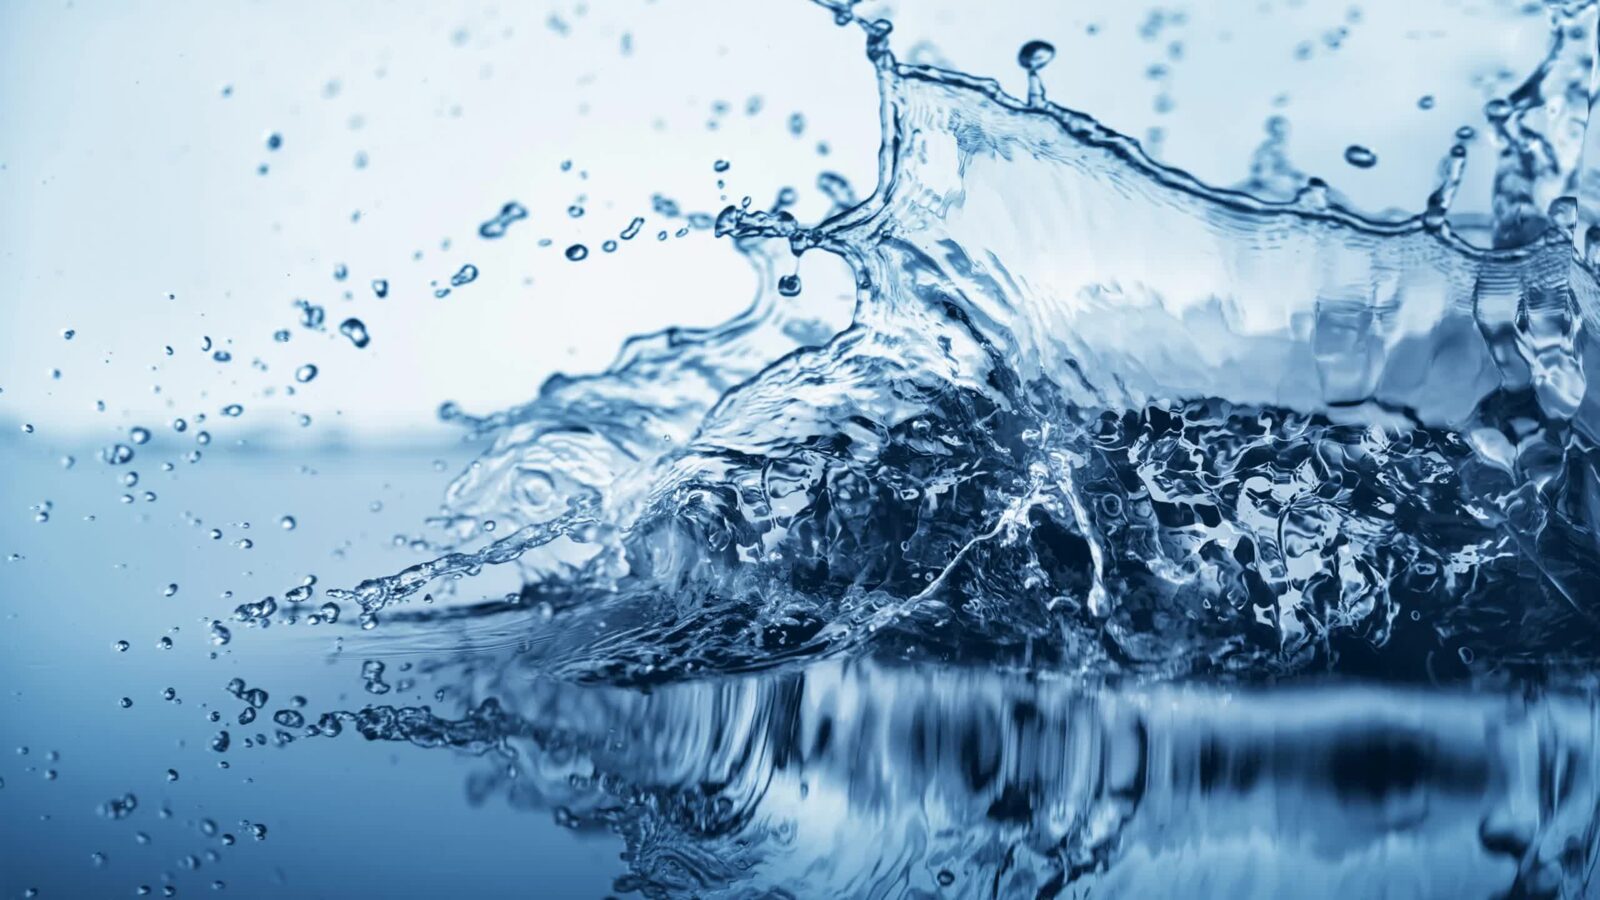 LiveWallpapers4Free.com | Water Splash Abstract 2K Quality - Free Live Wallpaper